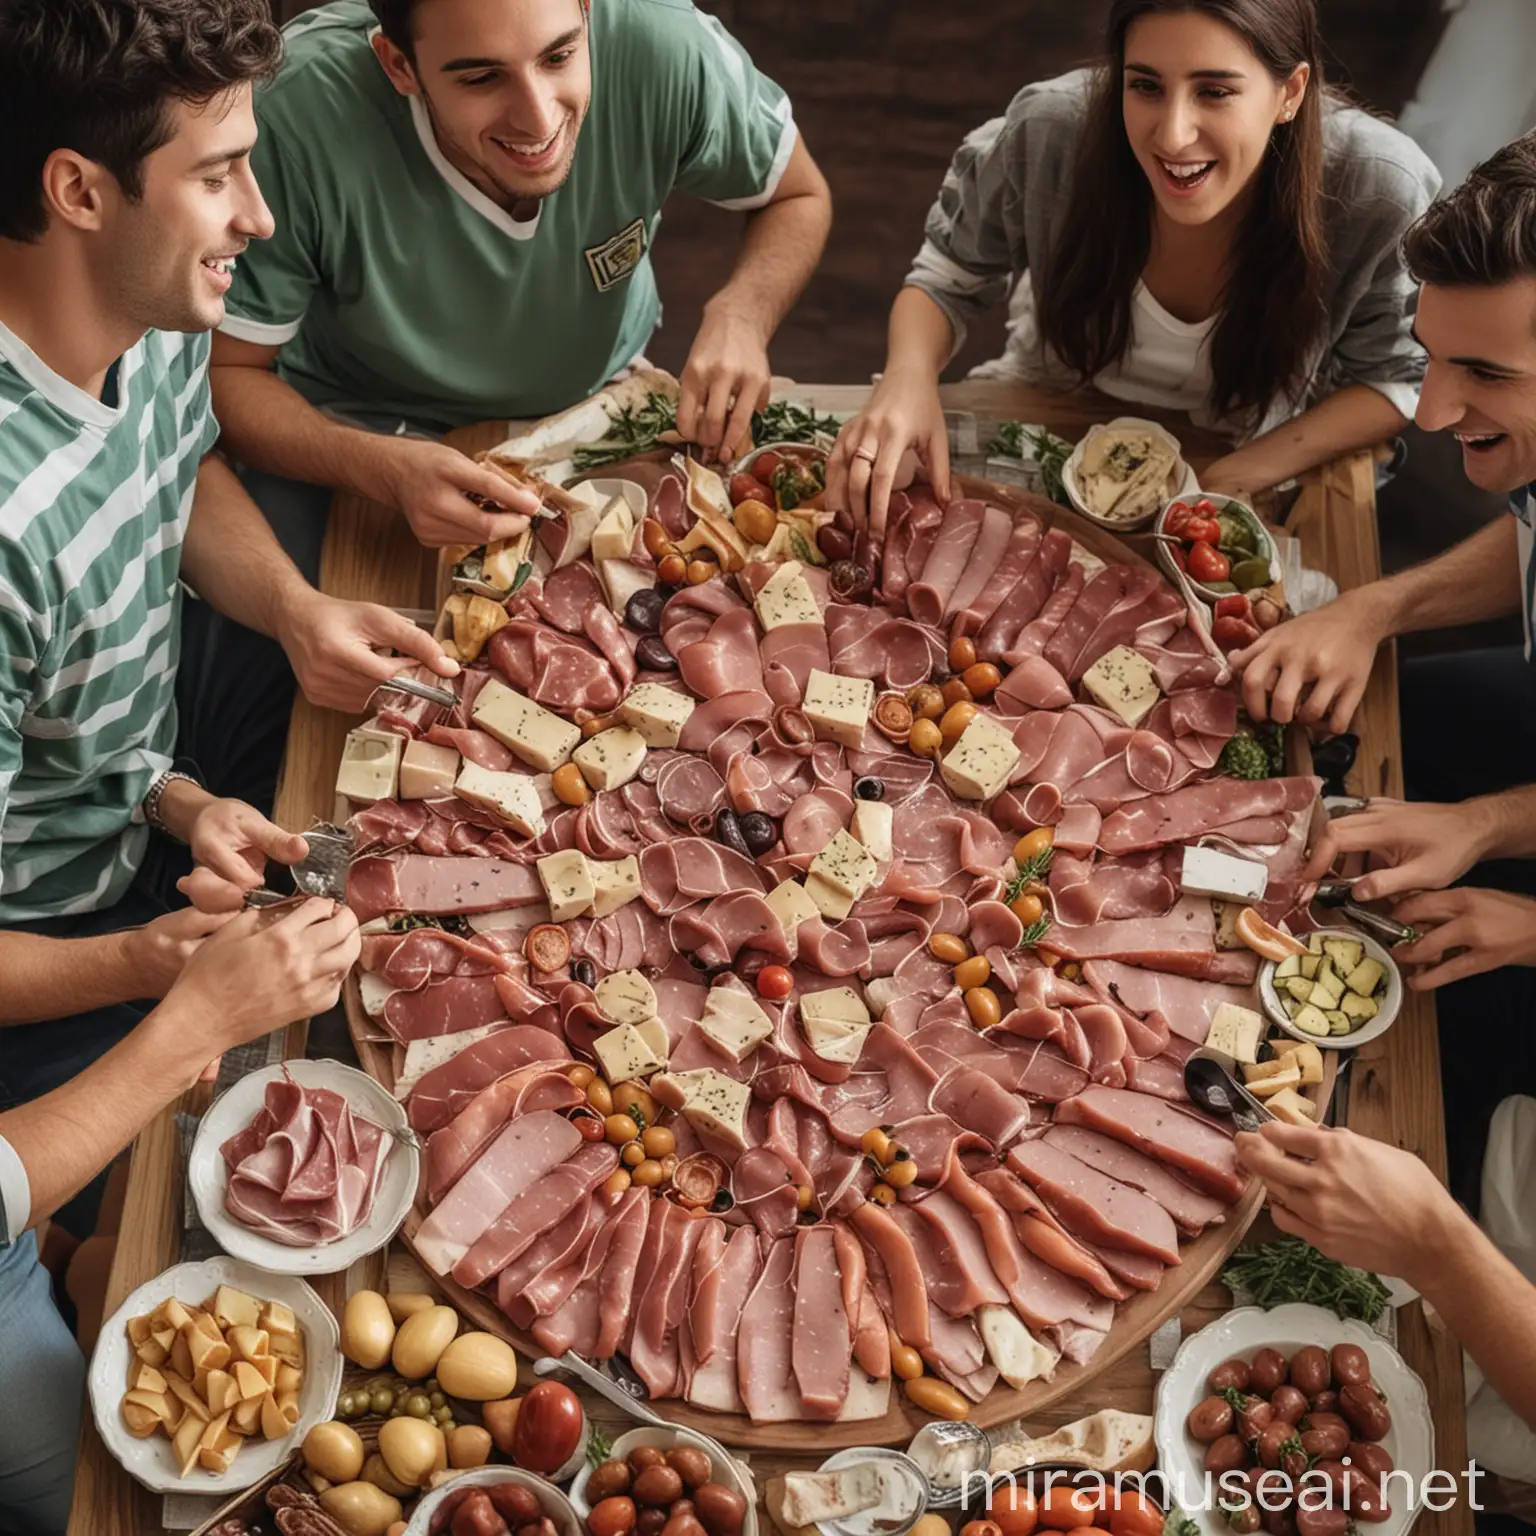 Friends Watching Soccer Match with Cold Cuts Platter